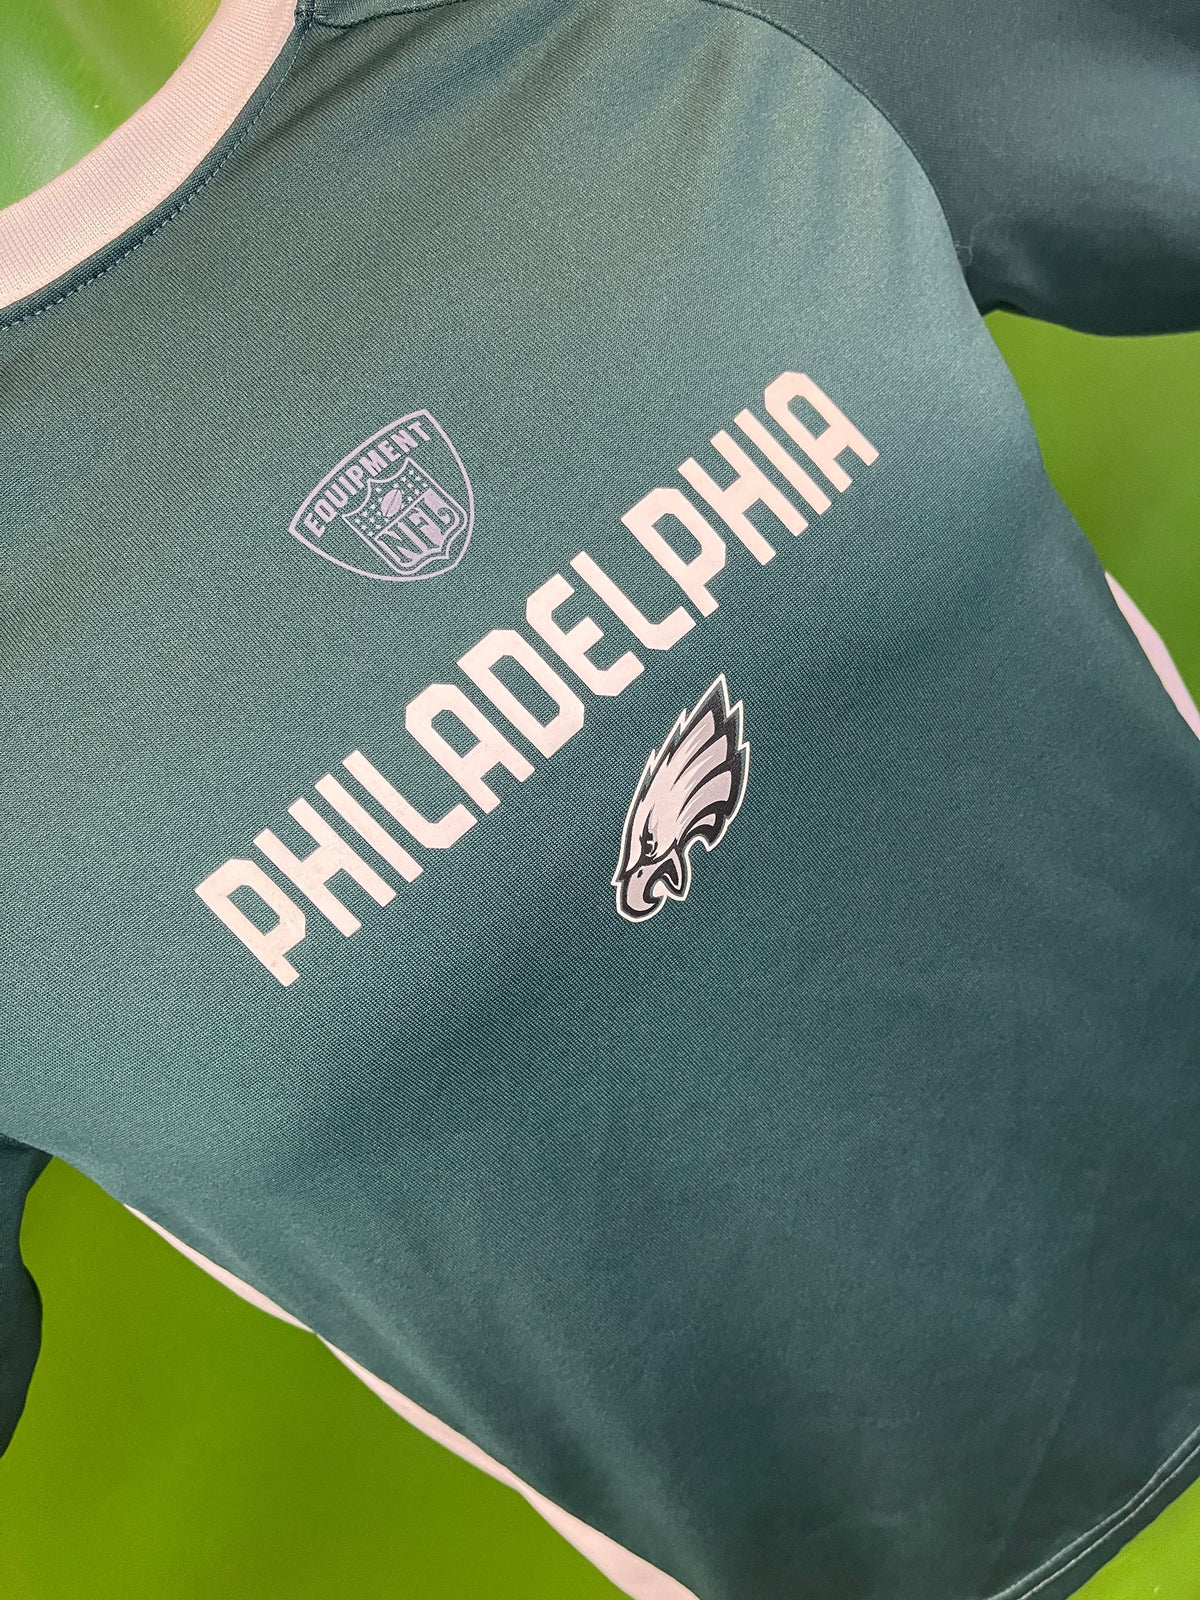 NFL Philadelphia Eagles Wicking L/S T-Shirt Youth Small 6-8